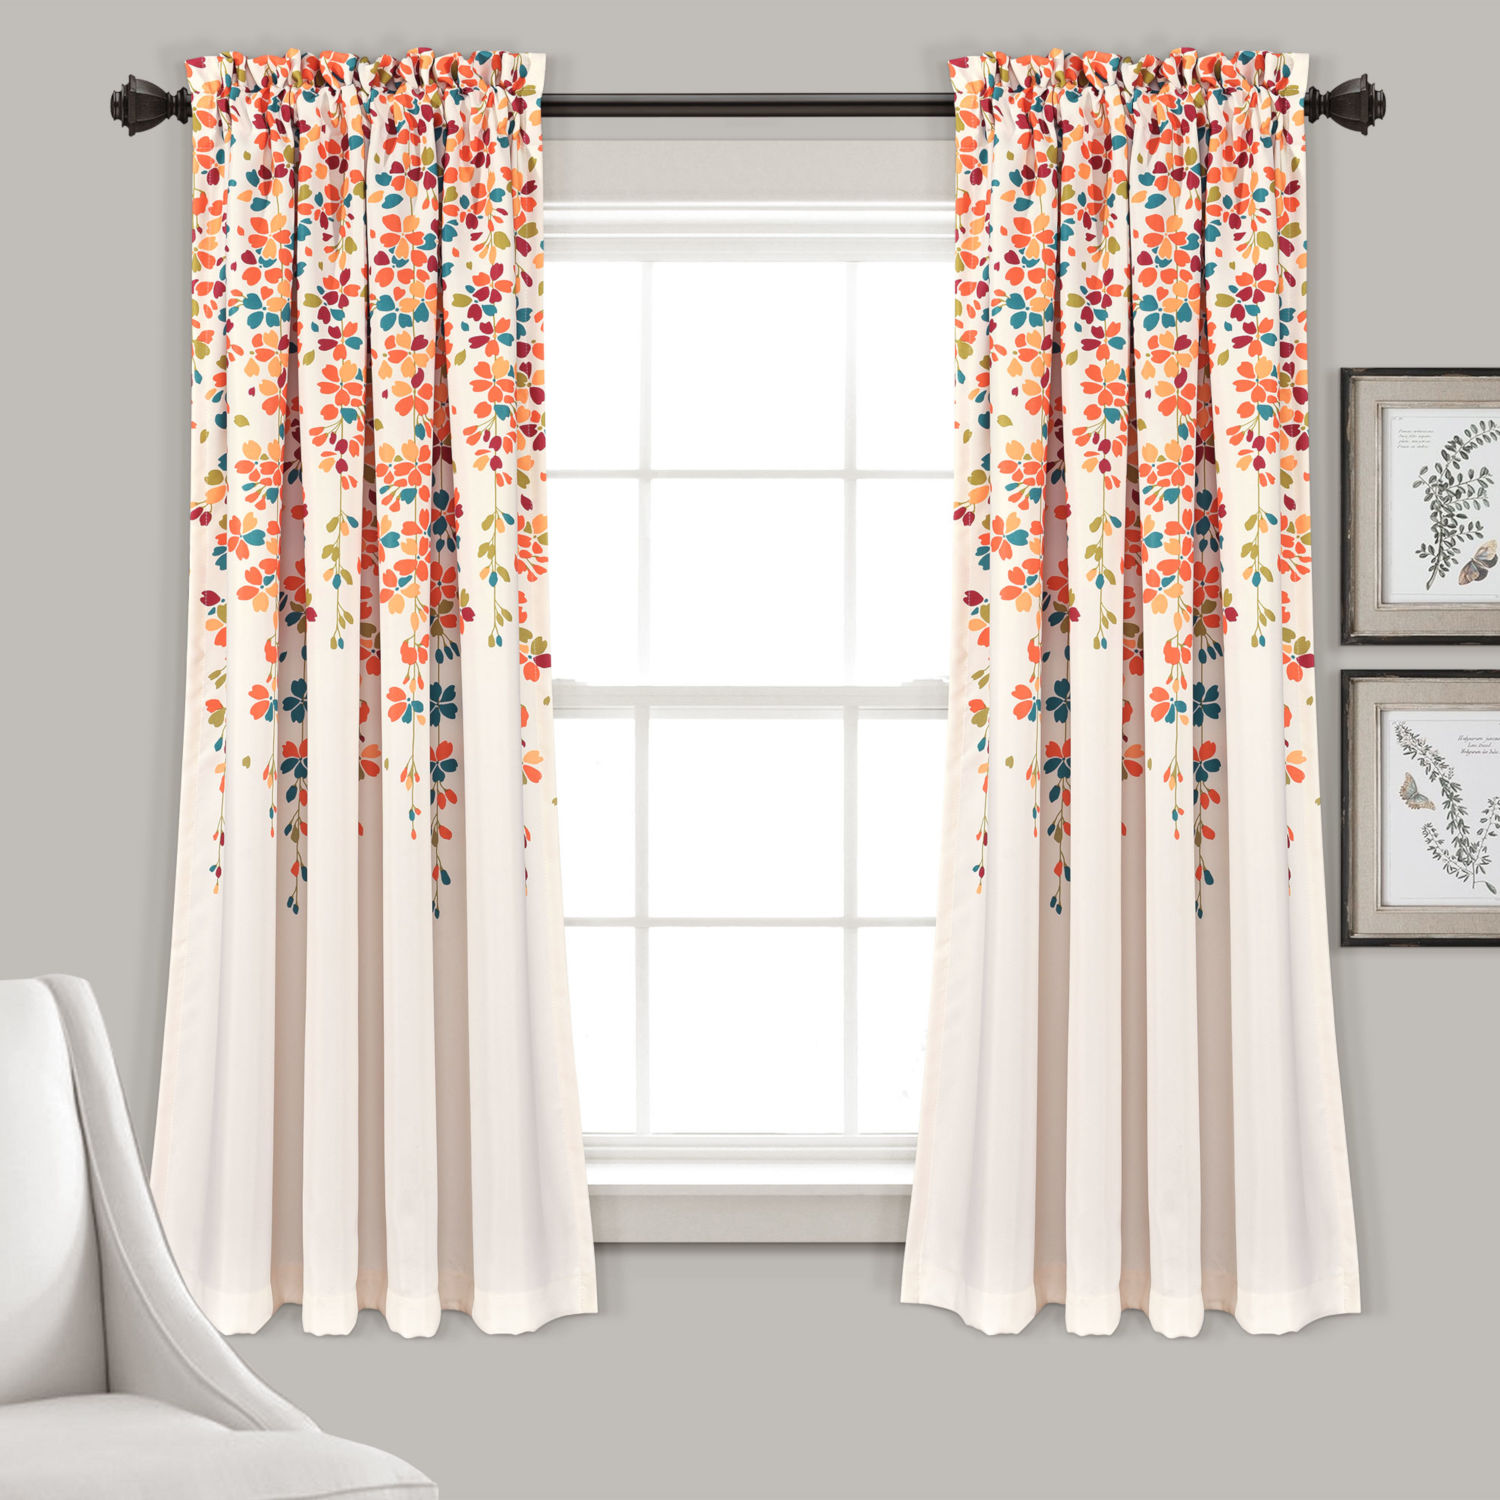 Curtains & Drapes Category